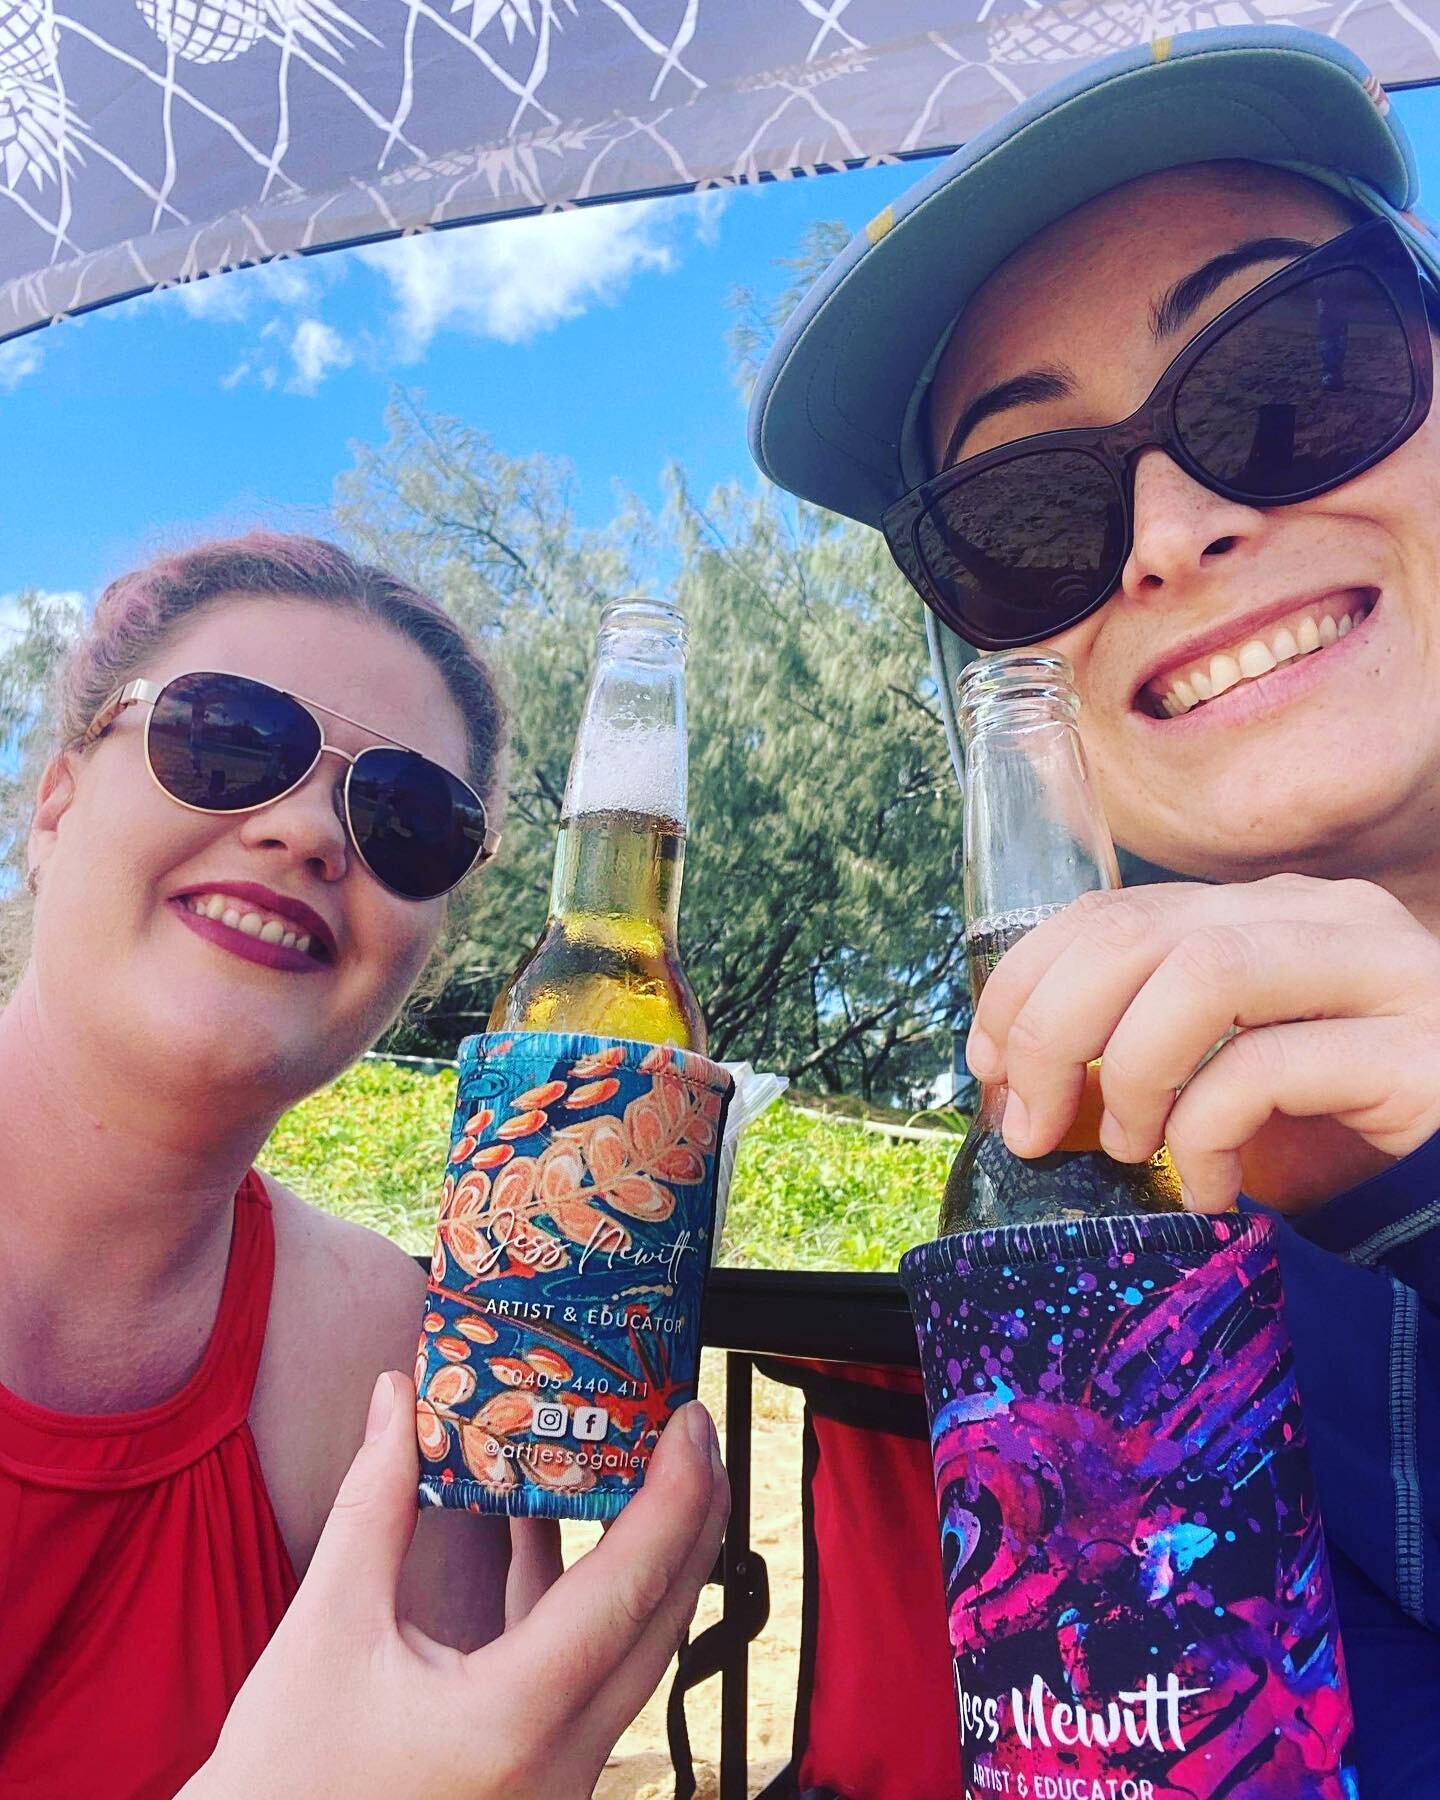 Spent the day at volleyball with my gorgeous girls and then my friends send me this!! 😂😂 hope the beach and beers were good @lilmorgan #beachbeers #coolers #funinthesun #rubitinwhydontyou